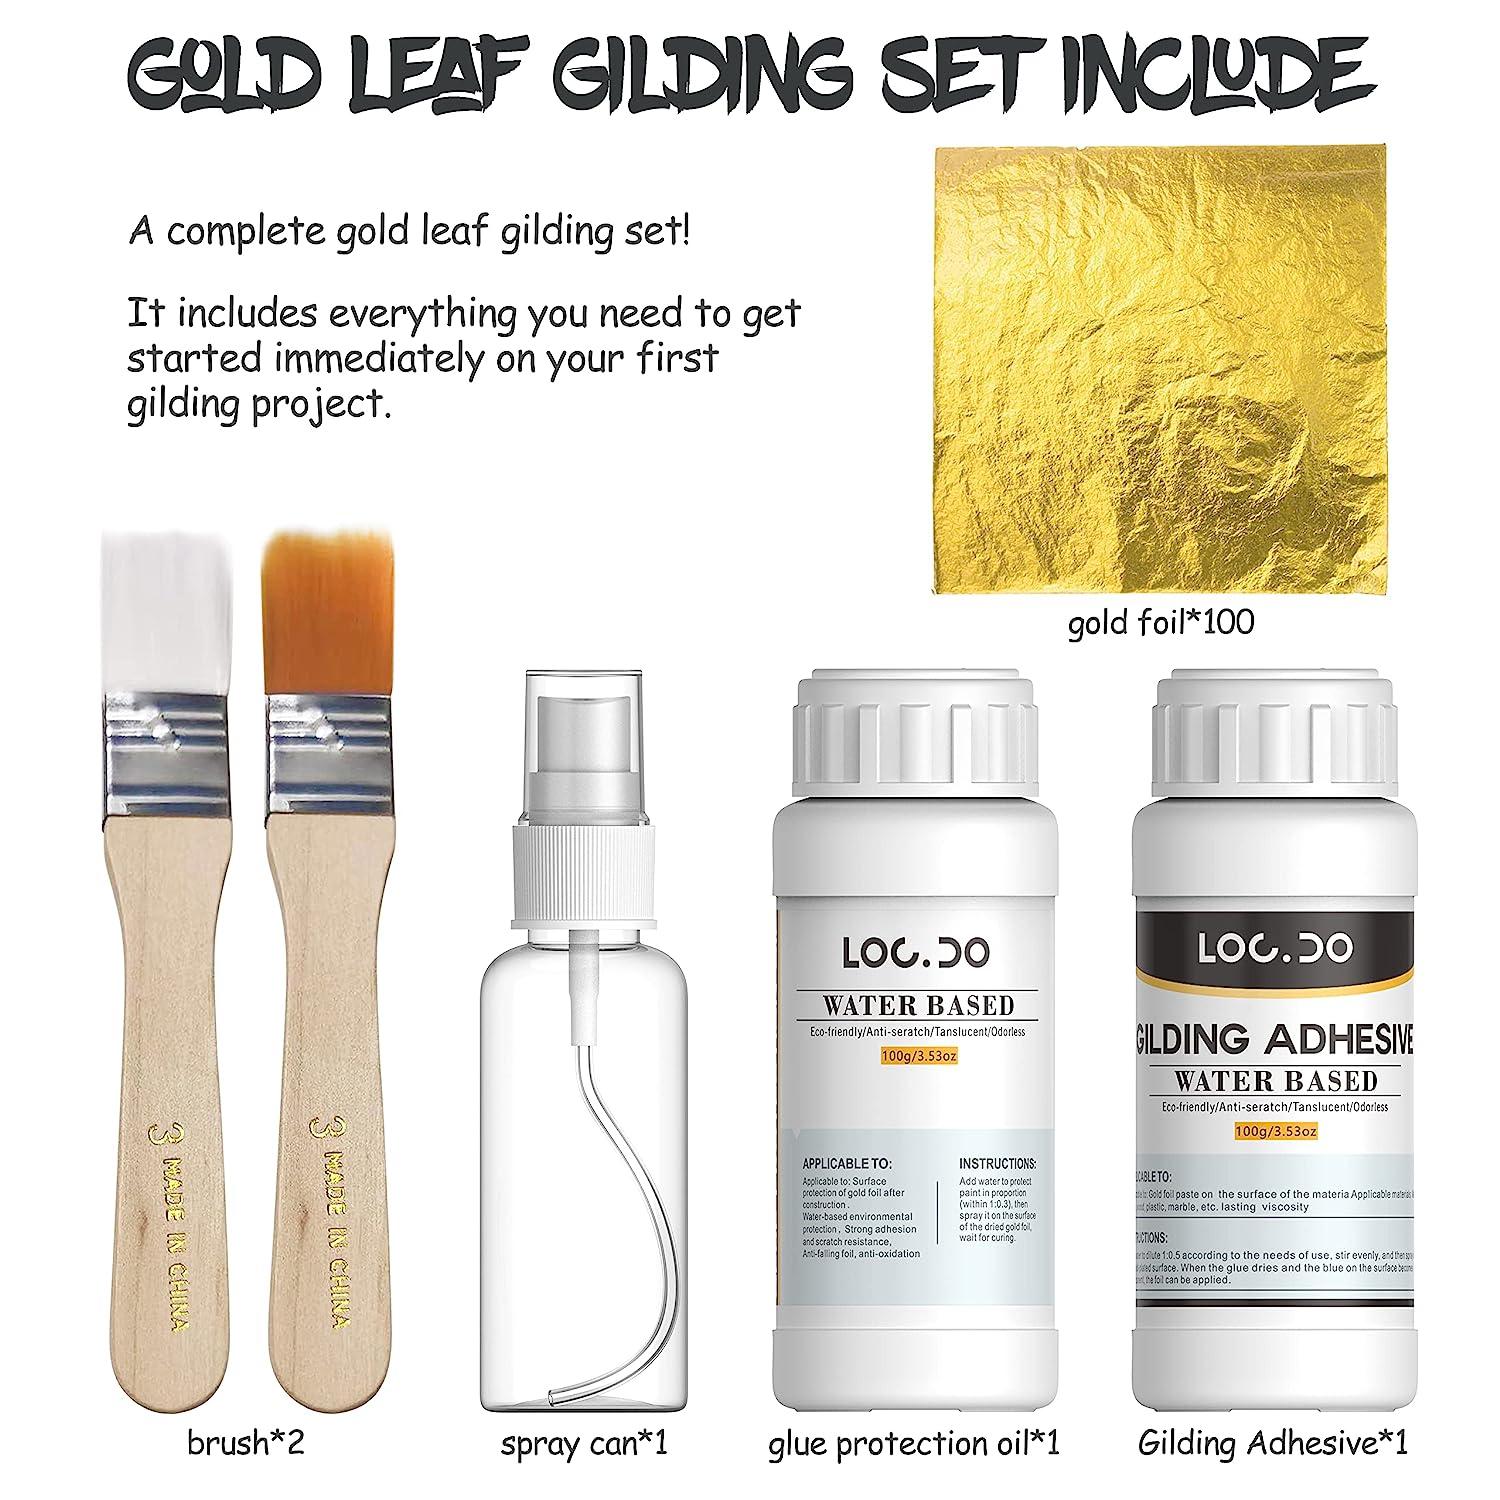 Wadities Gold Leaf Gilding Adhesive Set, 100ml Water Based Metal Leaf Glue and 100ml Varnish, Gold Leaf Sheets 100 Pcs, 2 Brushes, for Craft, Painting